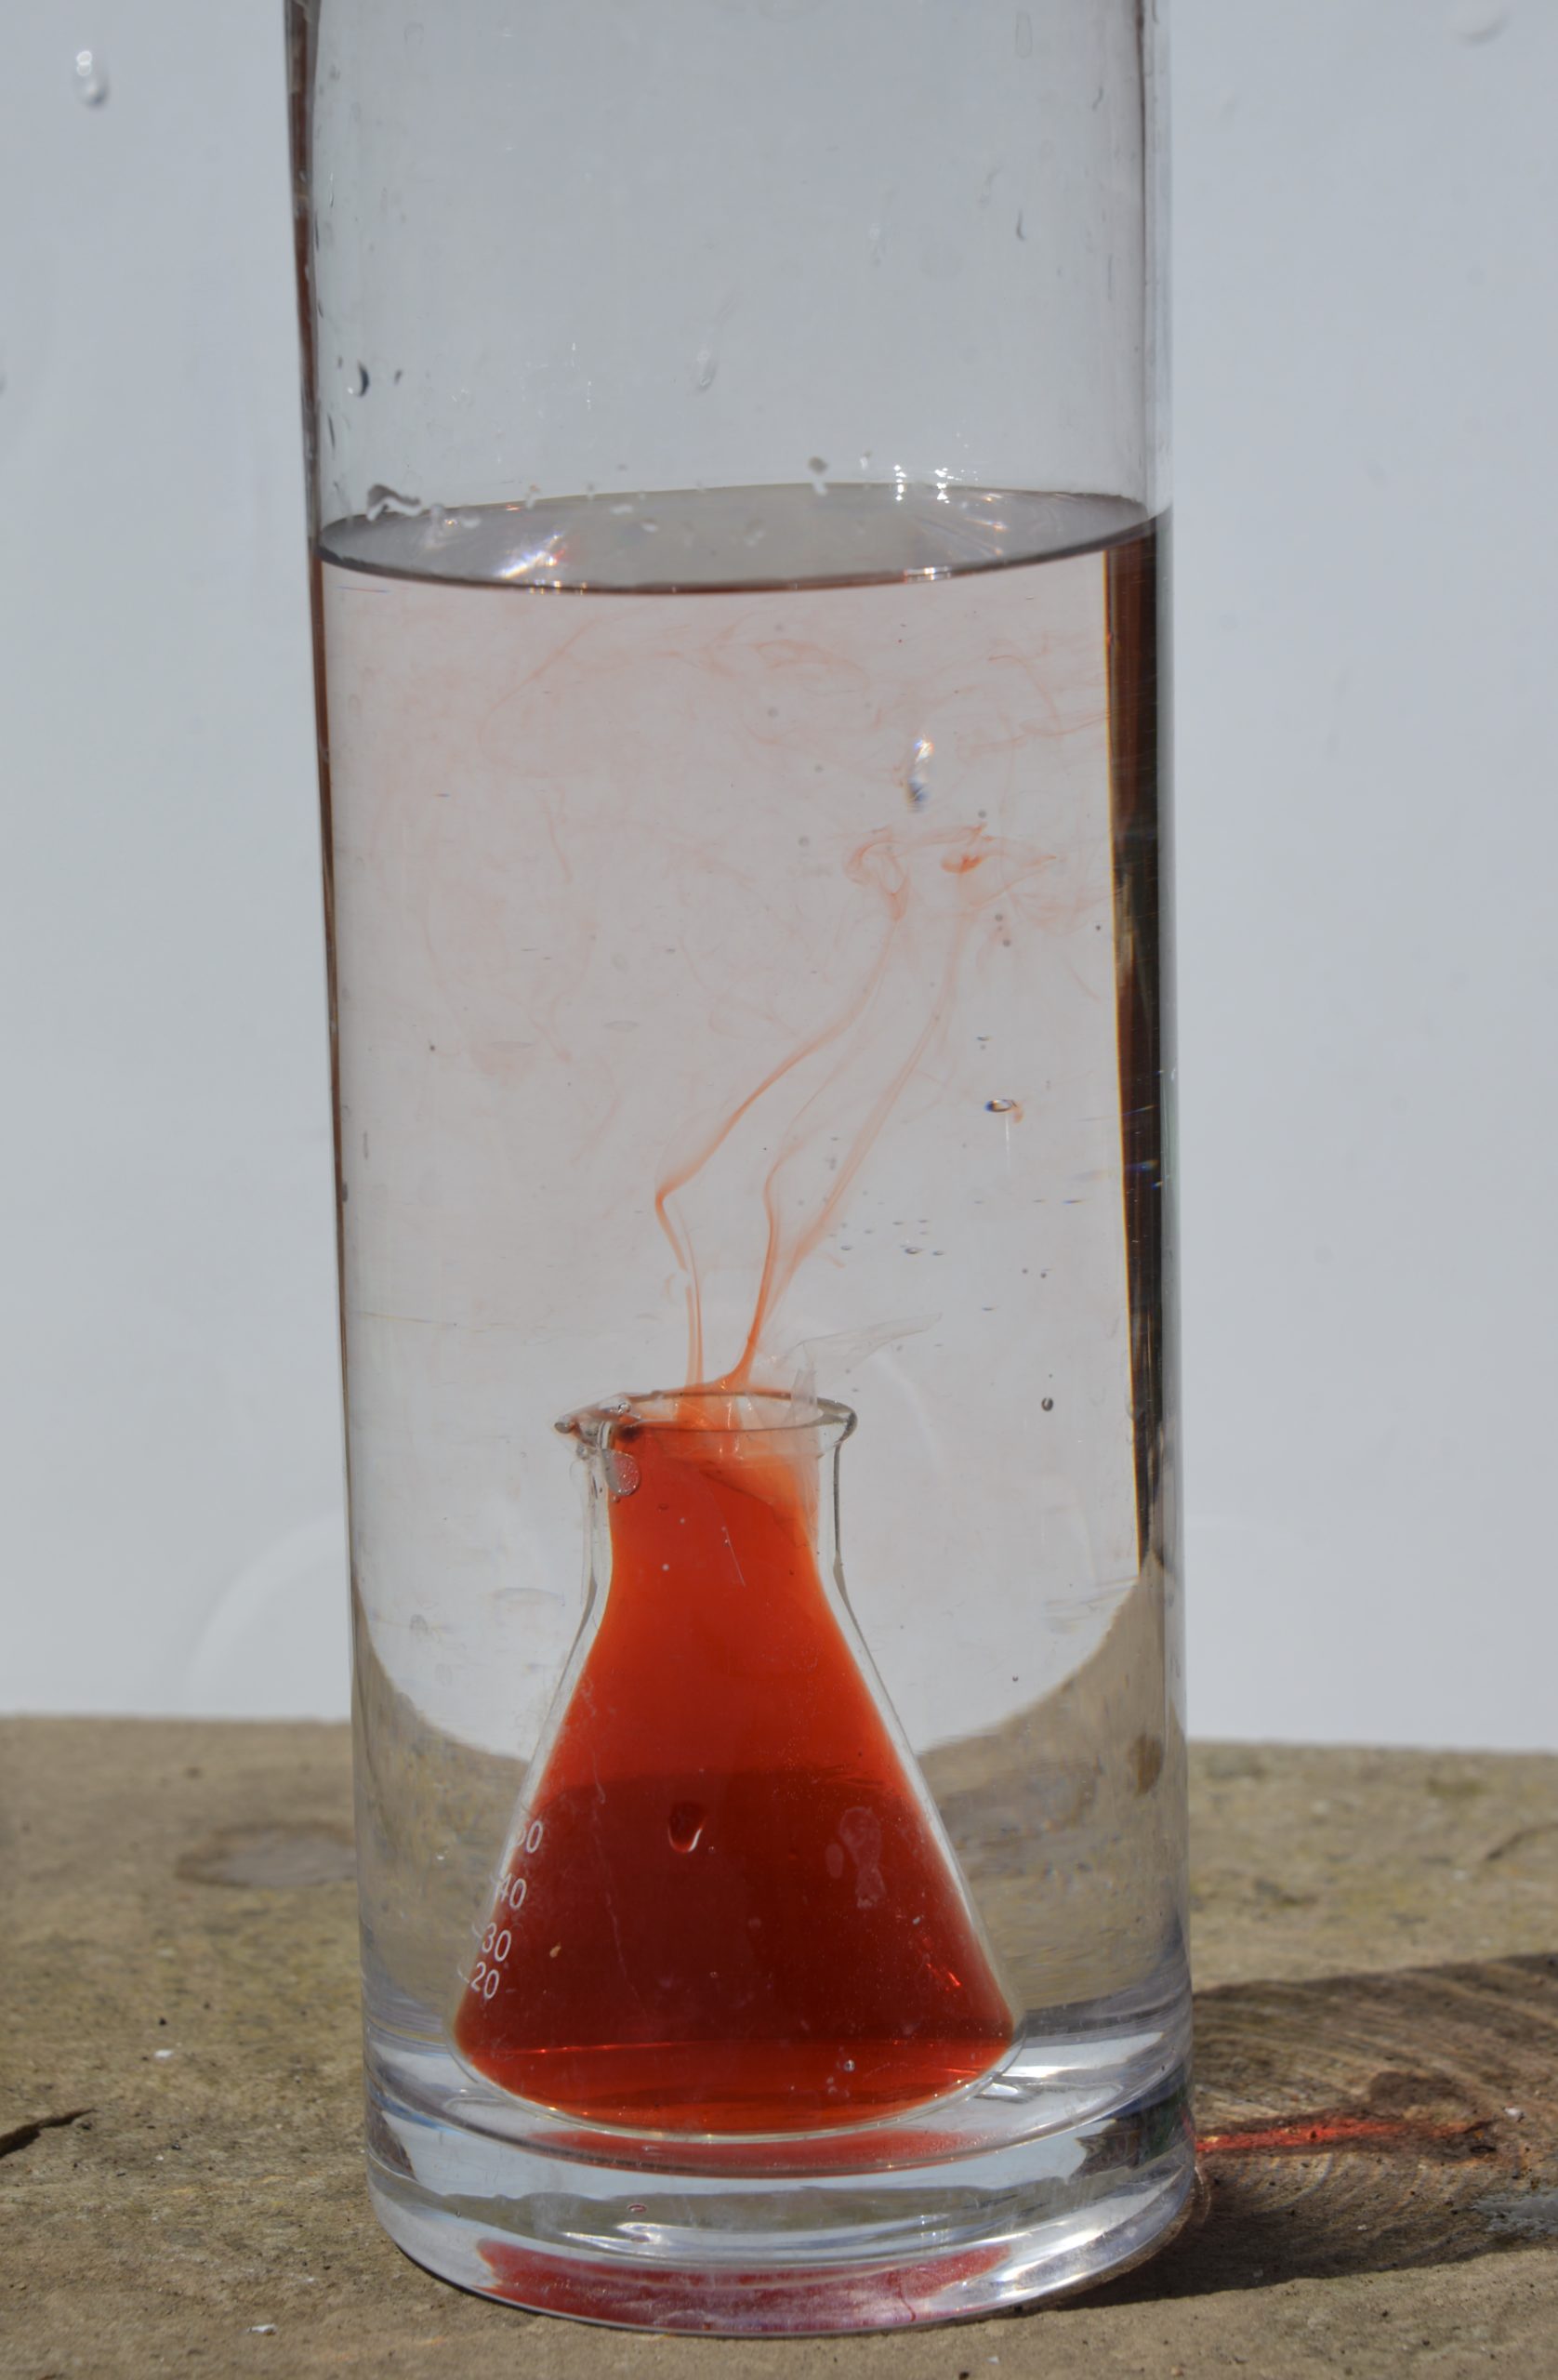 Second in a series of convection current demonstrations showing warm red water rising up through cold water